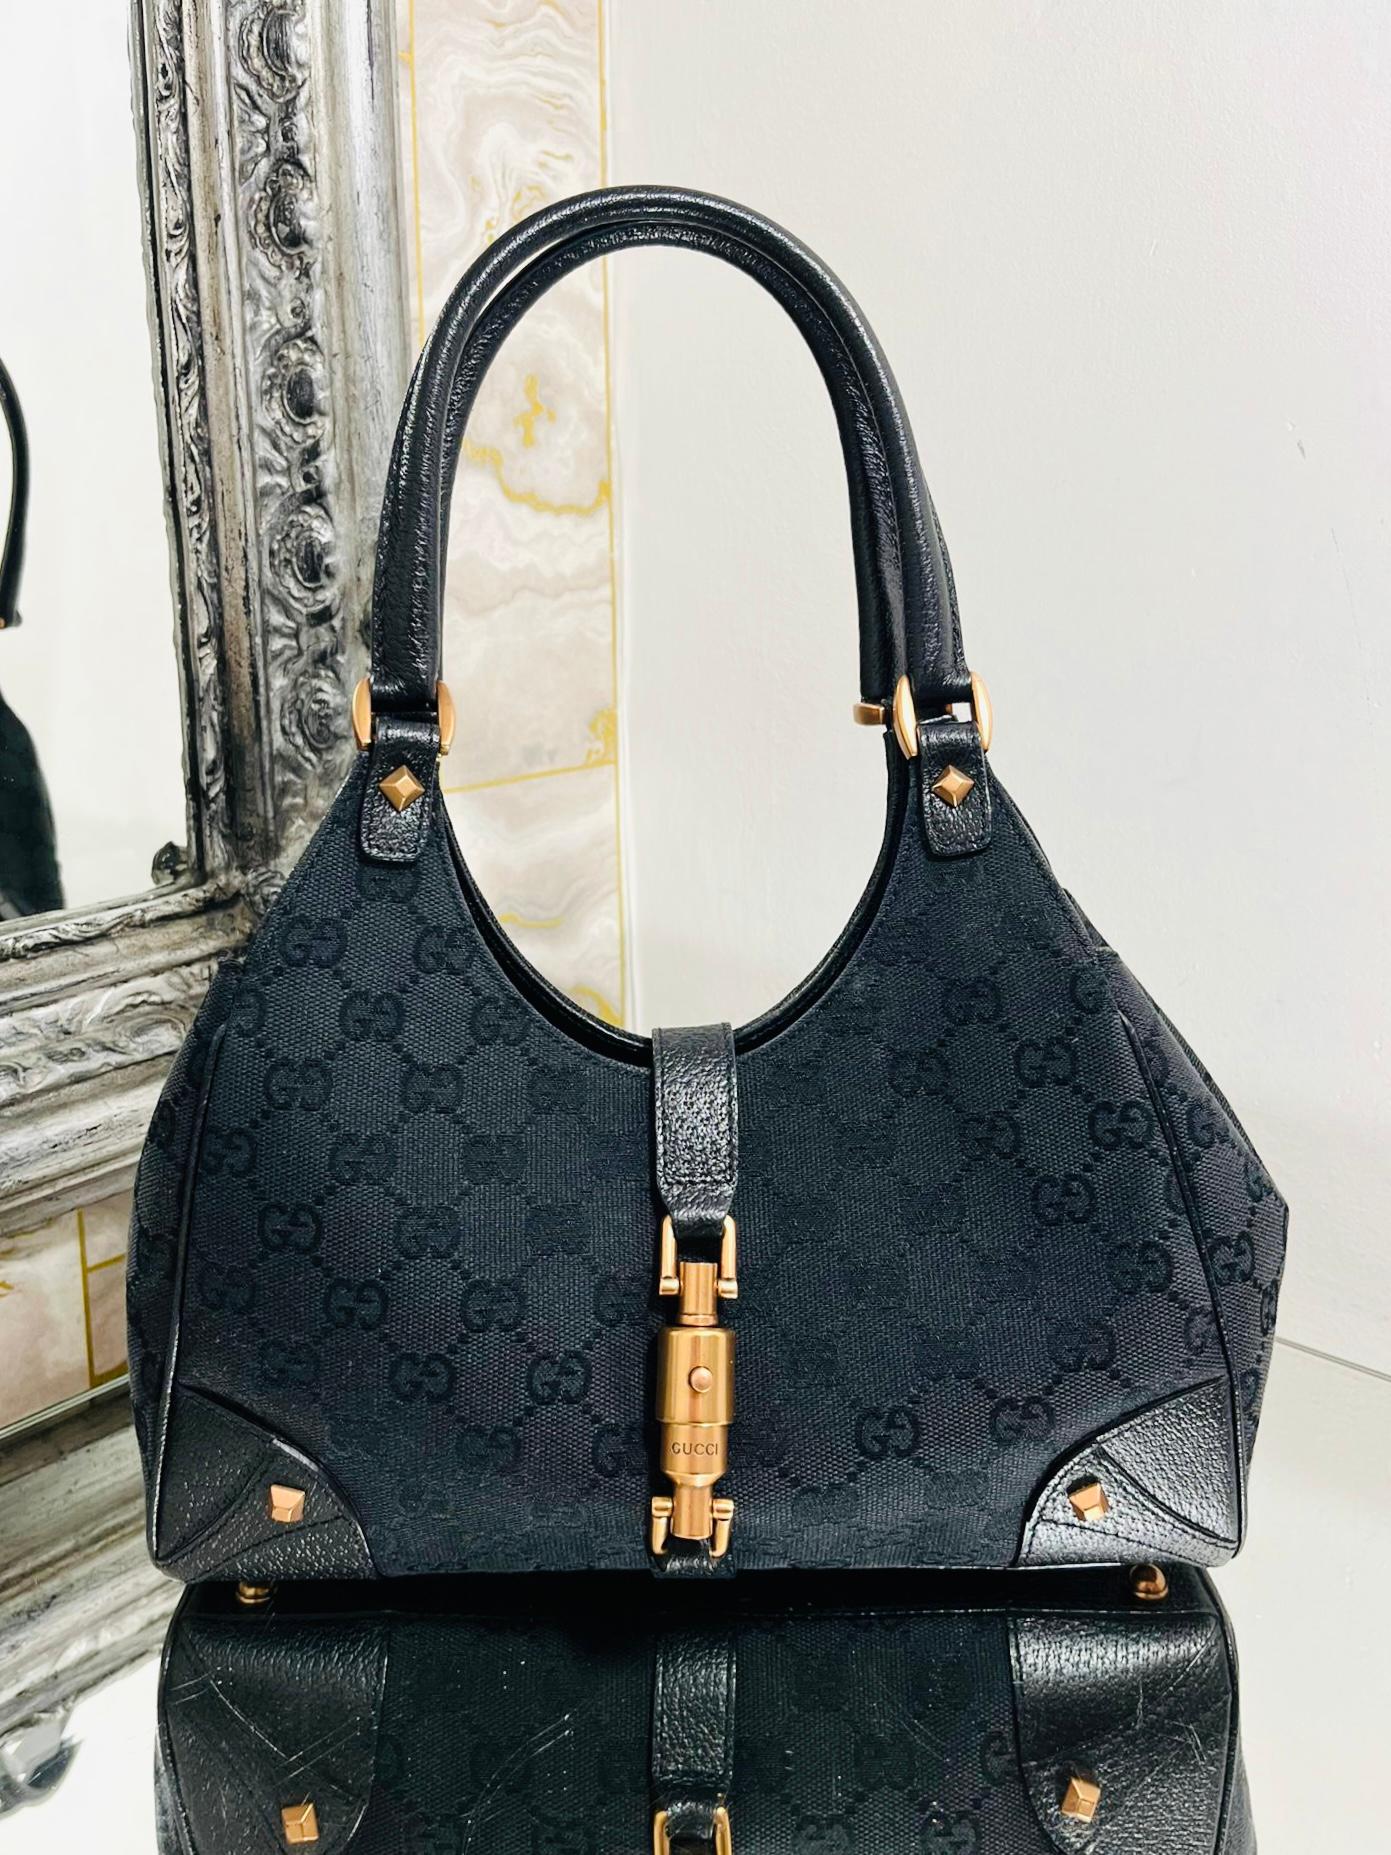 Gucci 'GG' Logo Jackie Canvas & Leather Hobo Bag

Black monogram canvas bag trimmed with leather and gold studs.

Signature Jackie push-lock closure. Two shoulder/carry handles.

Size - Height 15cm, Width 30cm, Depth 5.5cm

Condition - Vintage -